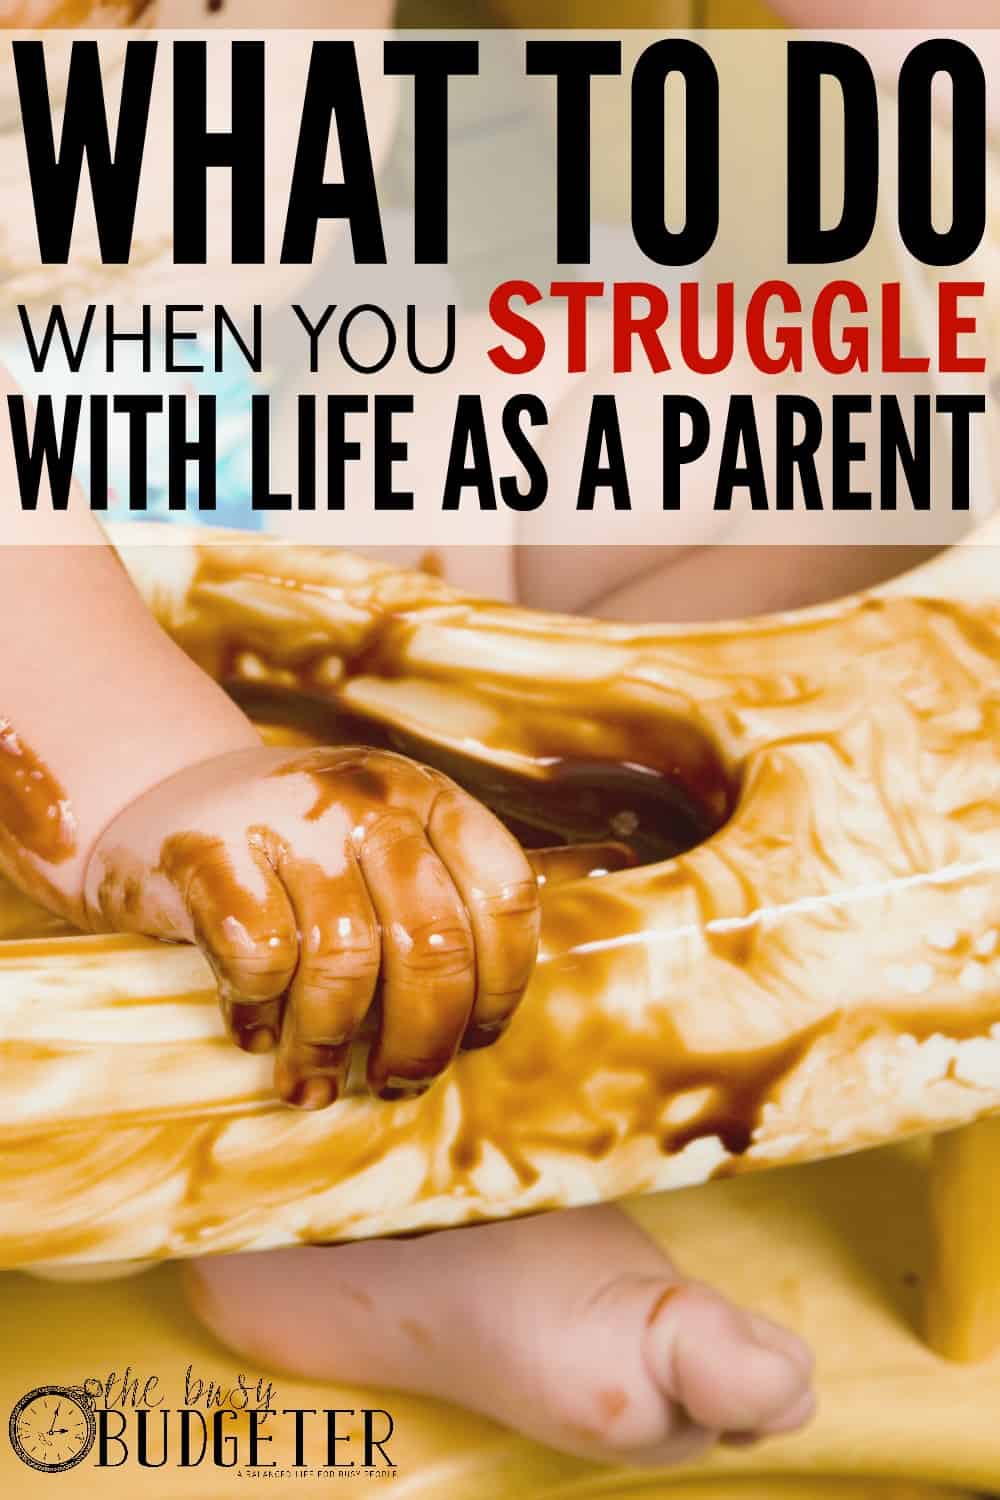 What to do when you struggle with life as a parent. This made me laugh and cry at the same time. I'm so sick of everyone with their perfect lives and I'm over here just trying to not leave a pound of half eaten food on the floor after dinner. No one tells you that parenting is this chaotic. Everyone shows their "best face" and we all feel like crap about ourselves. We need more of this. 